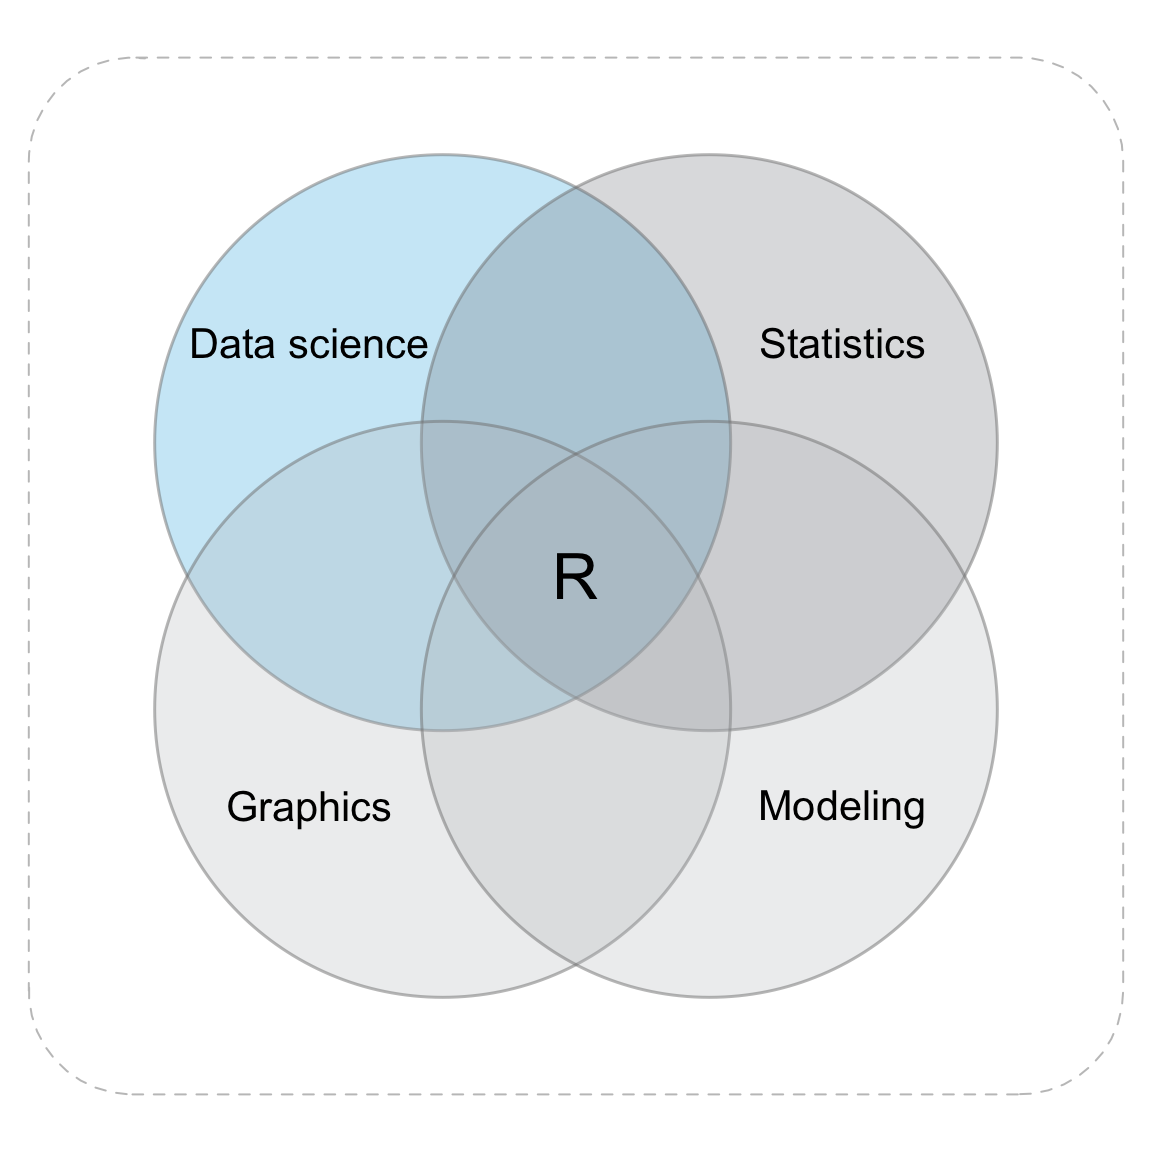 Data science combines a variety of areas and skills.